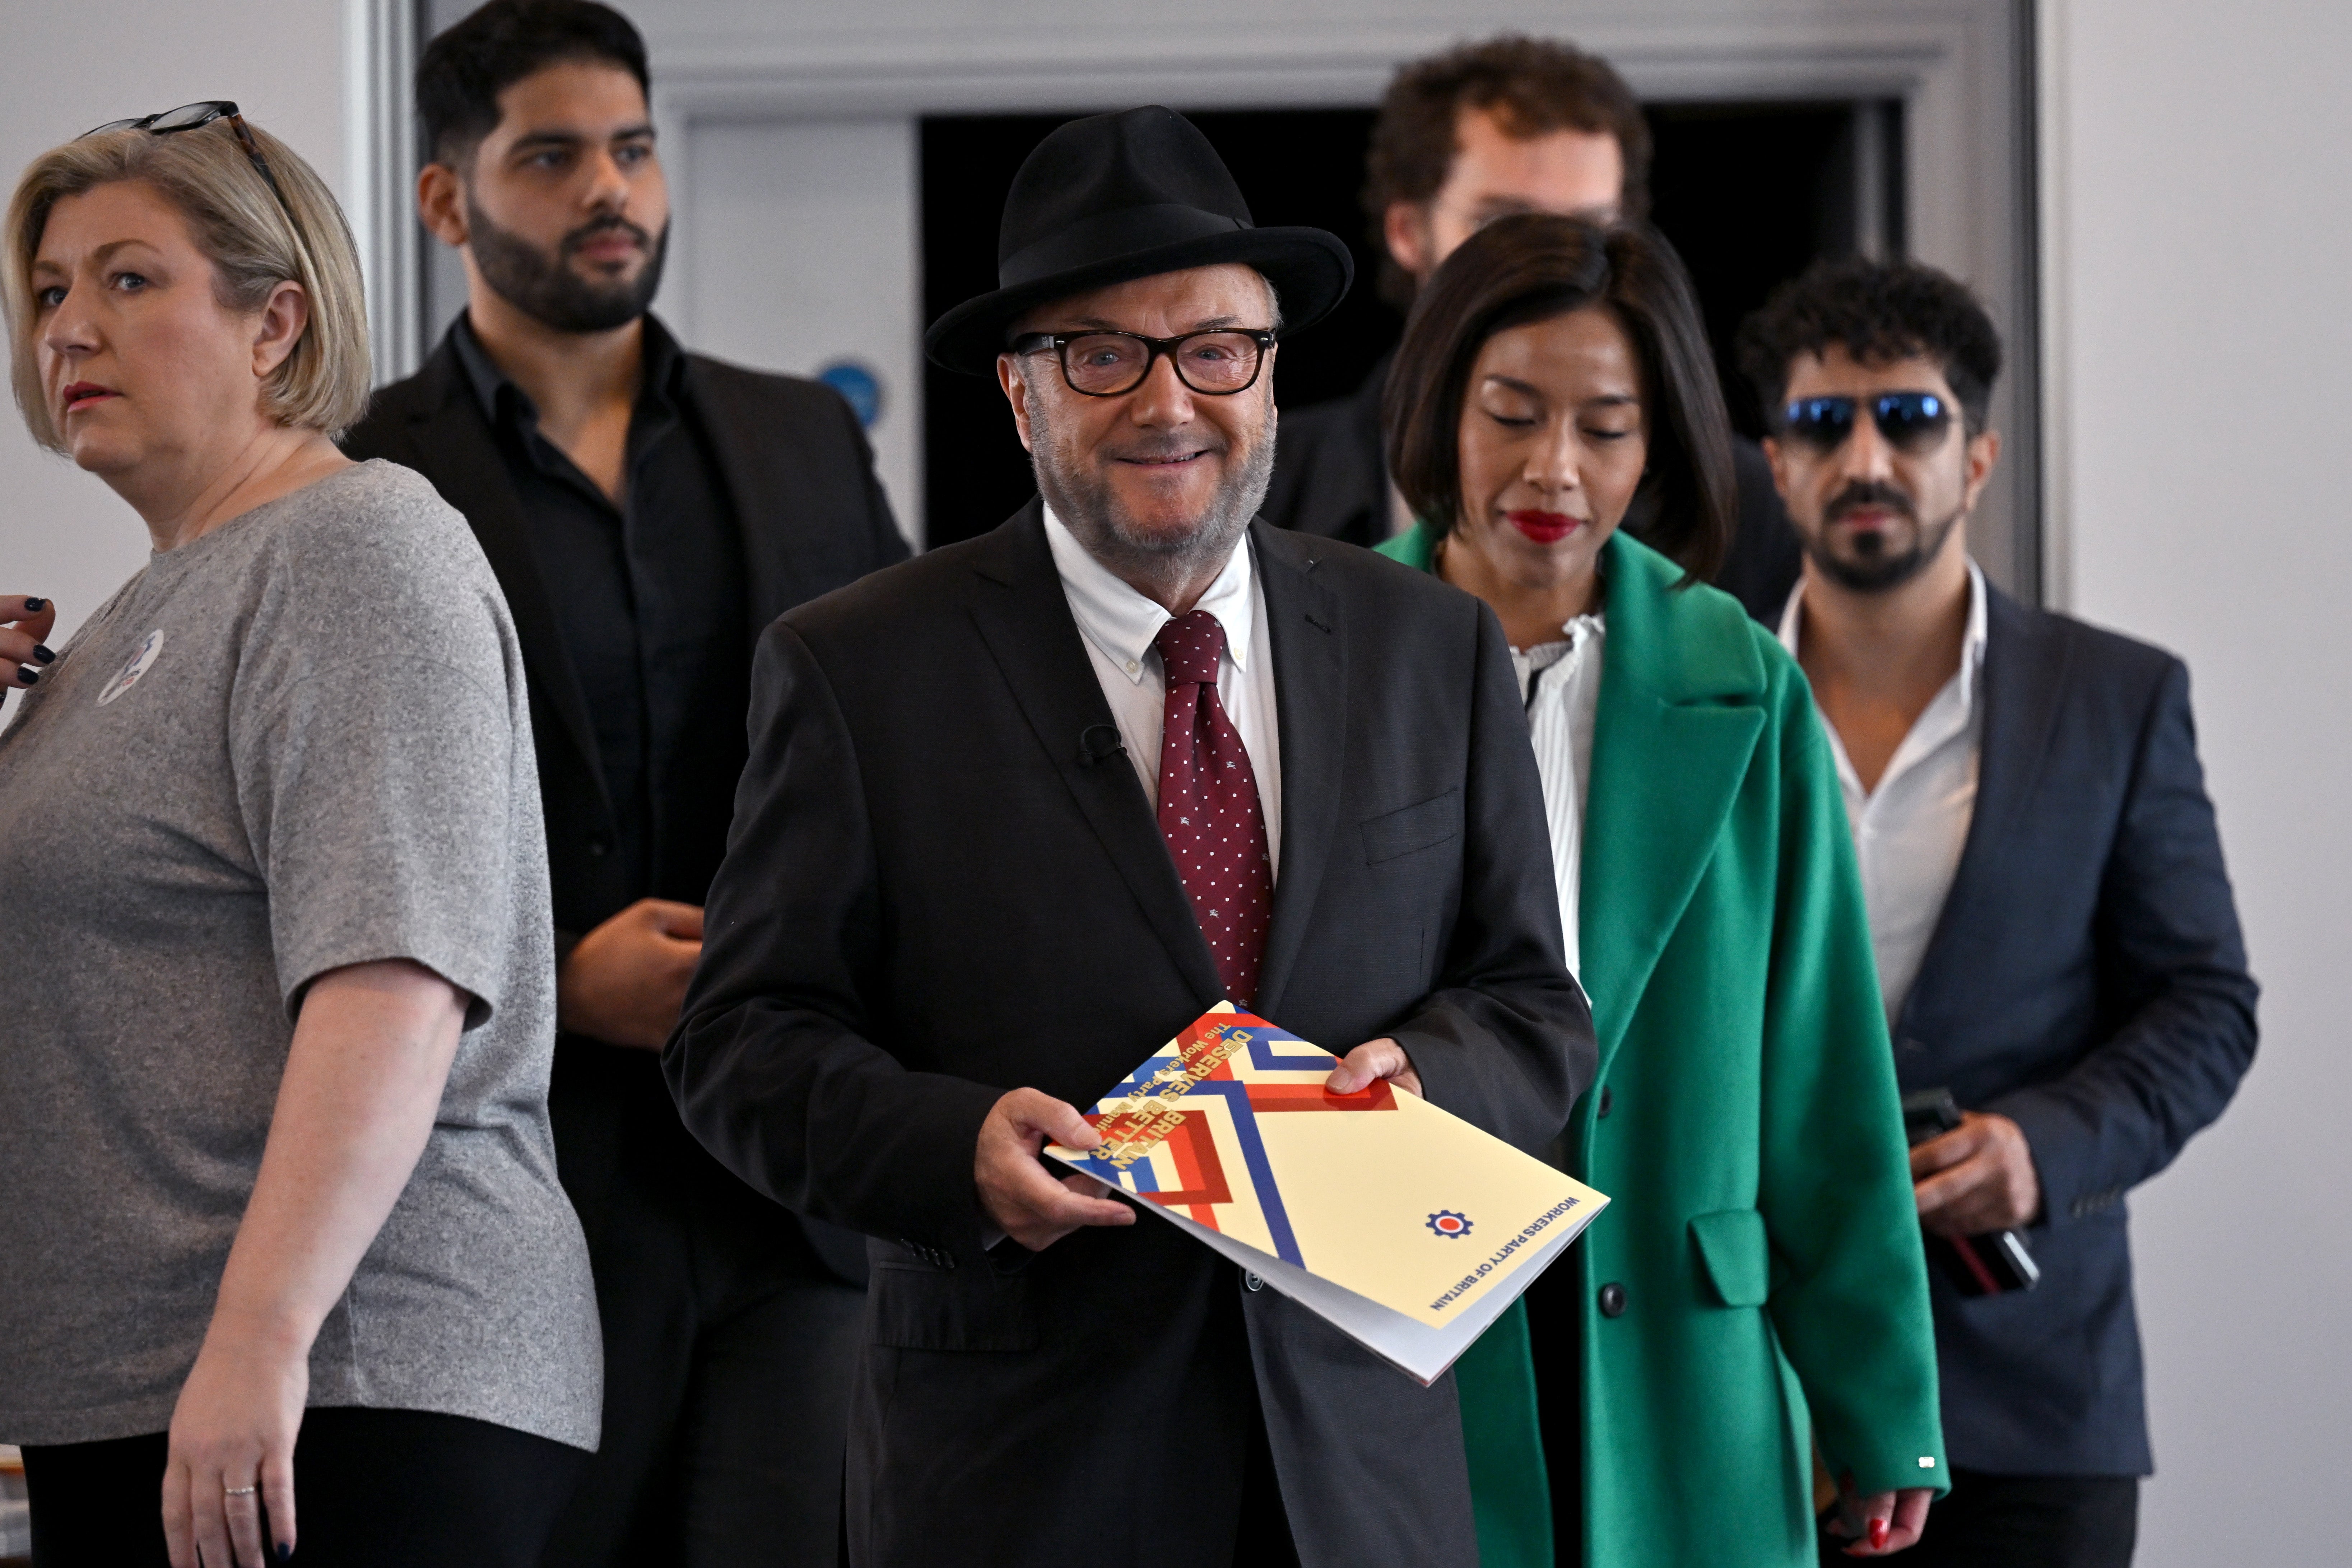 Leader of the Workers Party of Britain George Galloway arrives ahead of his party's manifesto launch at the Voco hotel in Manchester